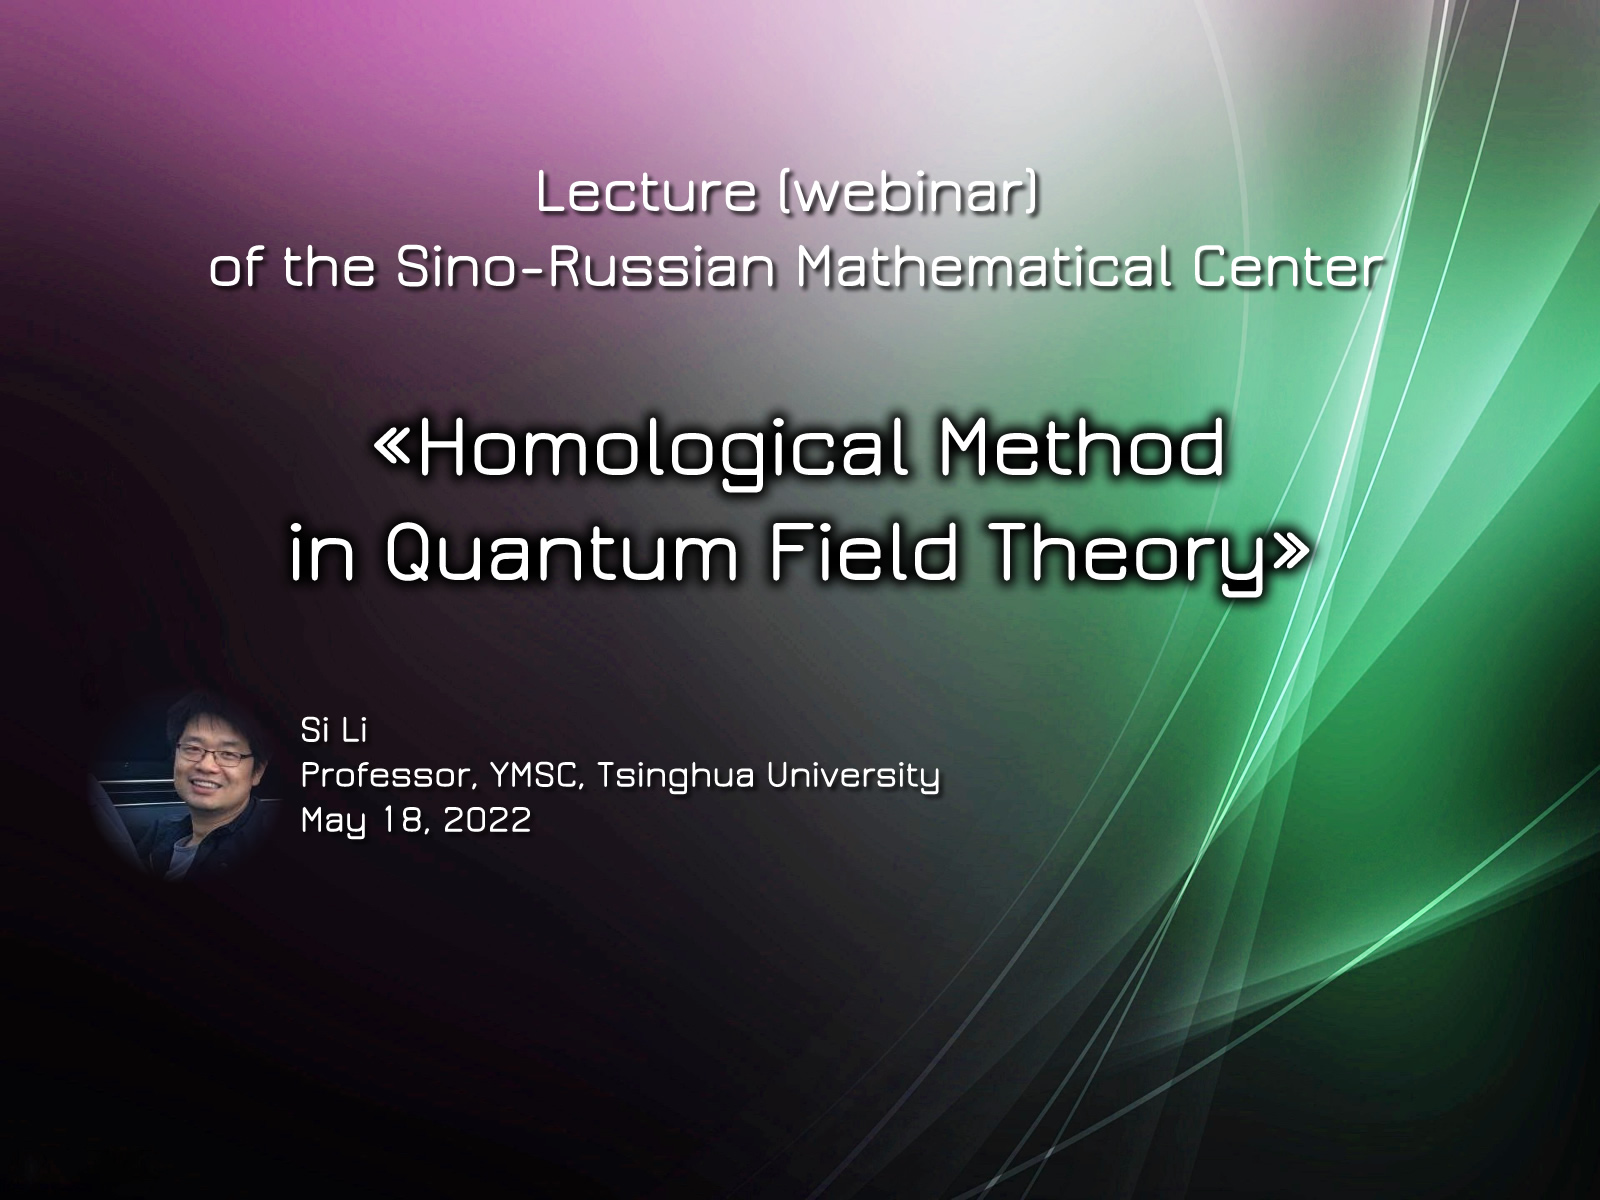 «Homological Method in Quantum Field Theory» 18.05.2022